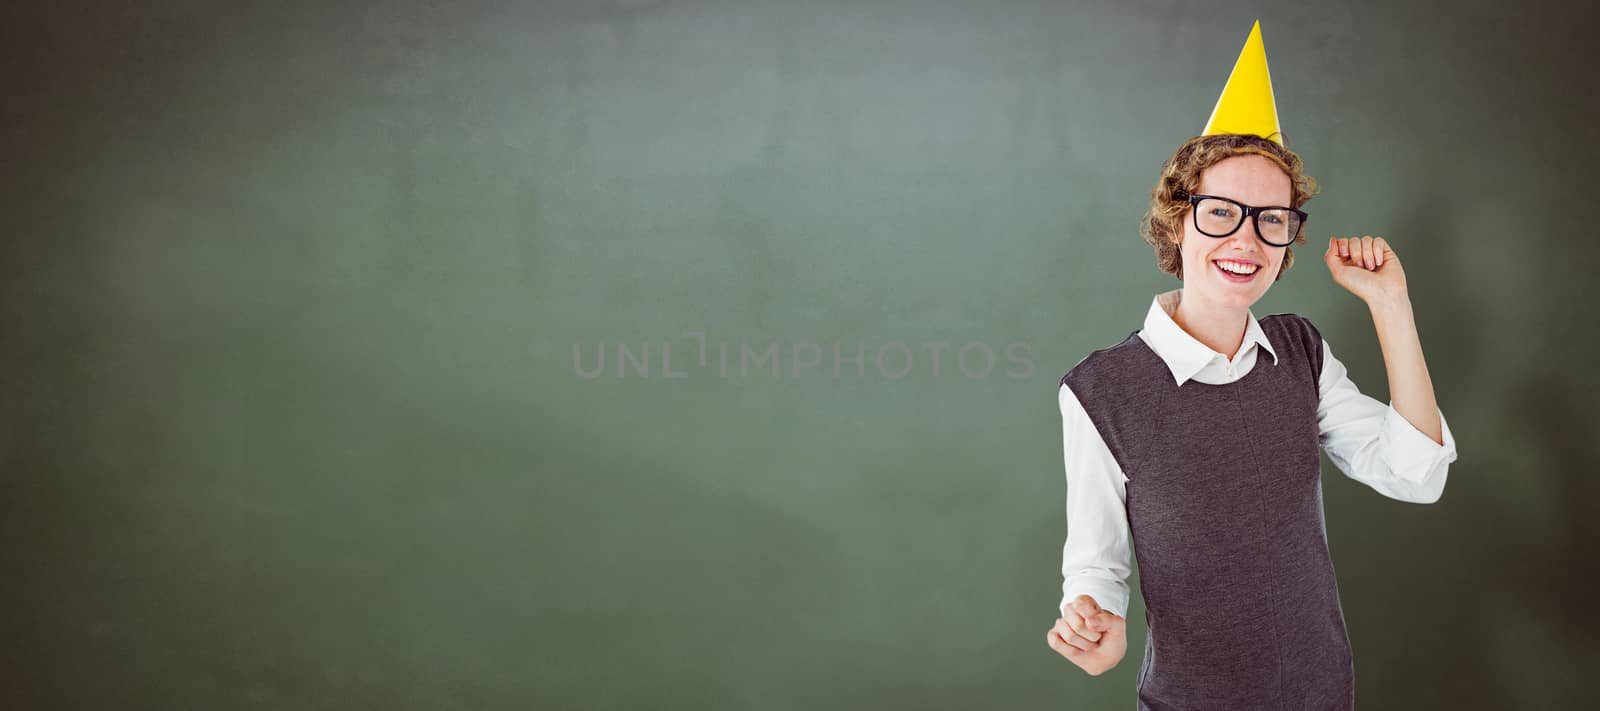 Geeky hipster wearing a party hat against green chalkboard